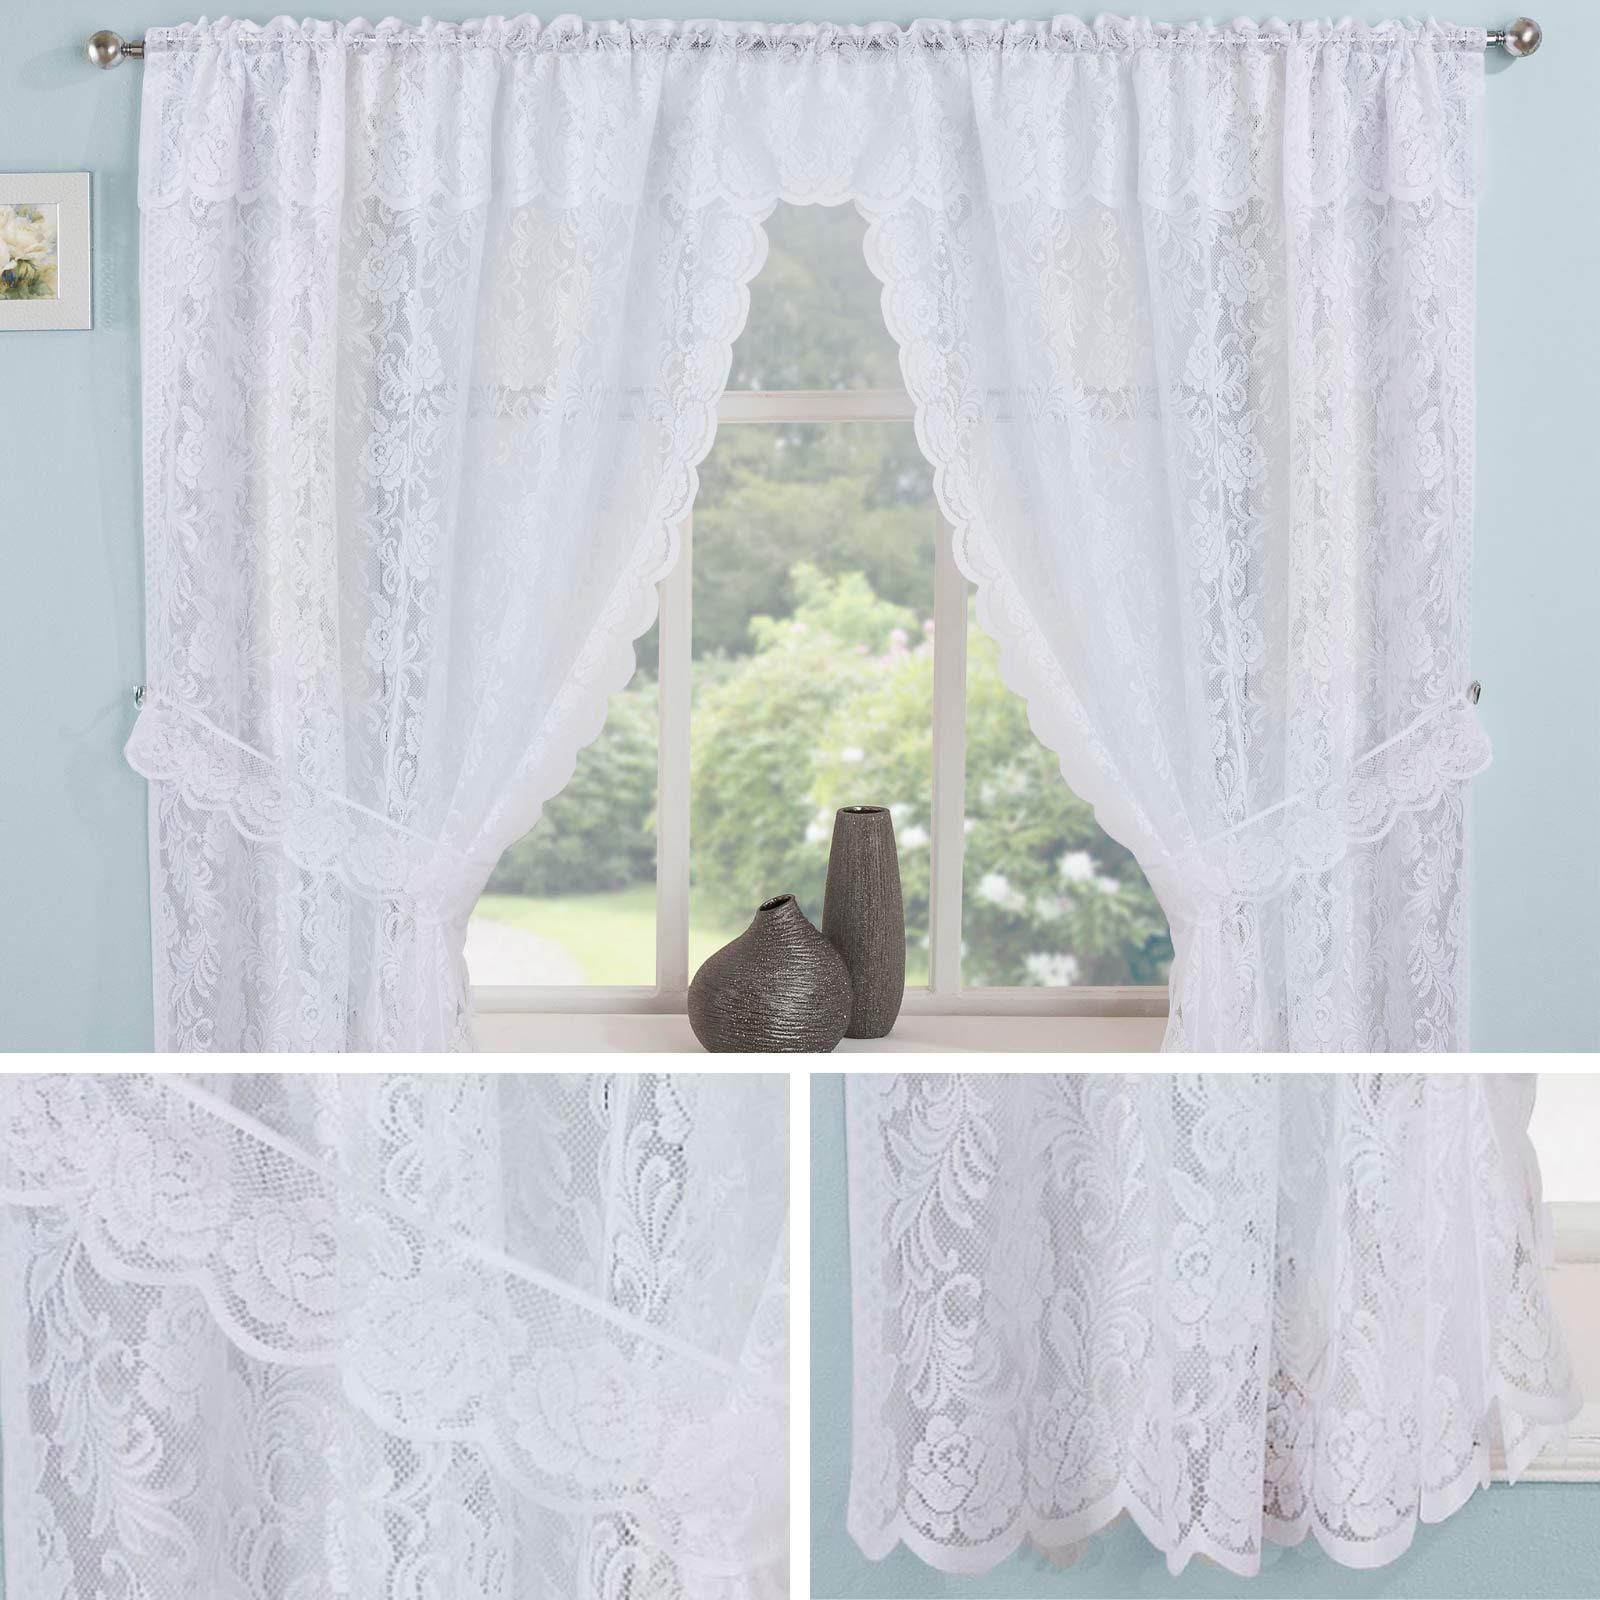 Details About Lace Curtain Sets White Kew Complete Kitchen Window Floral  Ready Made Curtains With Glasgow Curtain Tier Sets (View 8 of 20)